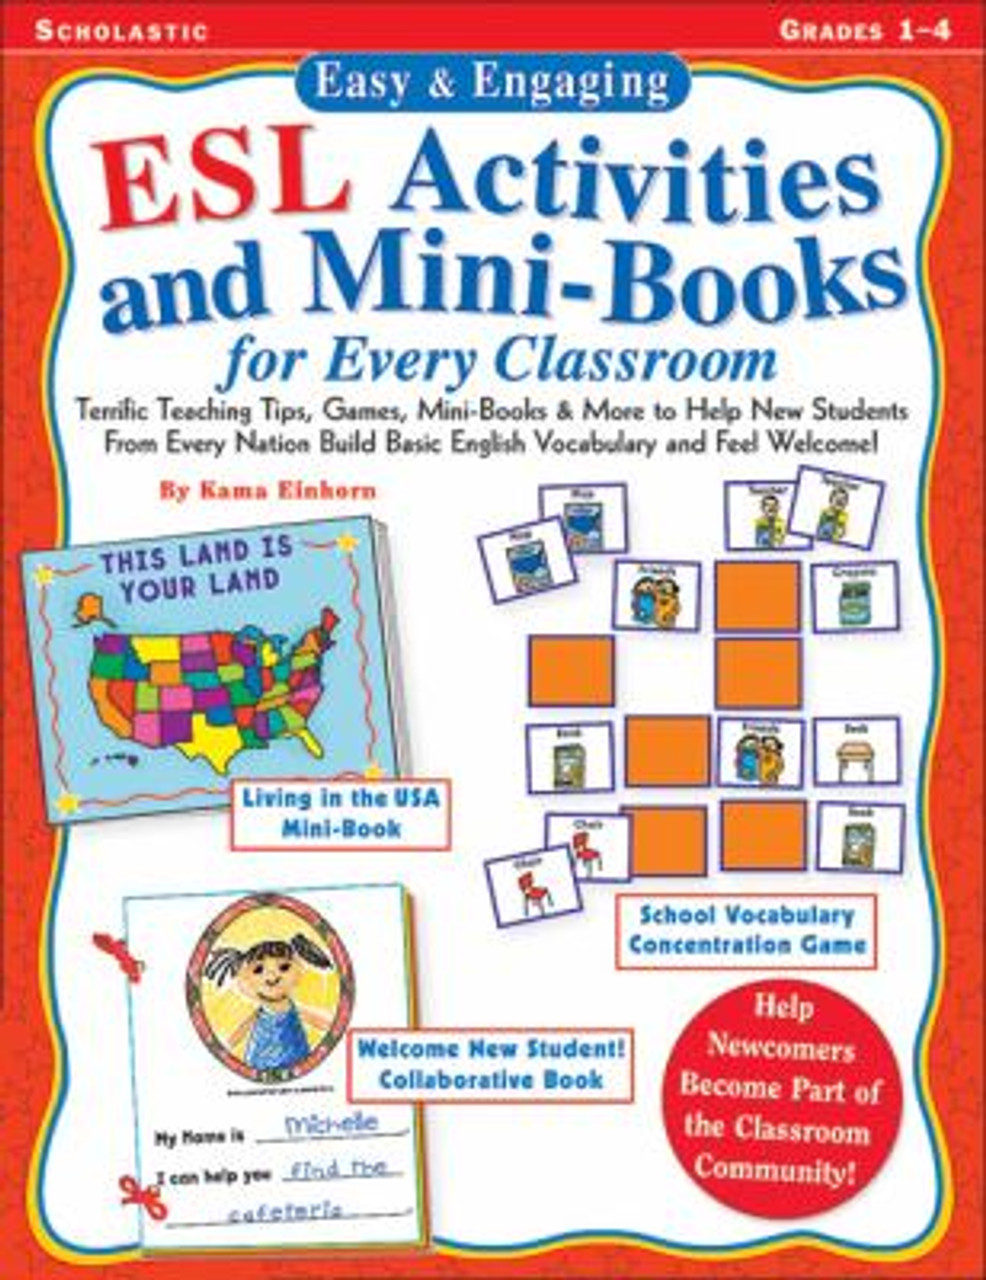 Vocabulary　Mini-Books　Help　Classroom　More　ESL　Welcome!　Activities　Students　from　Build　Teaching　and　to　English　and　Tips,　and　Mini-Books　Vol.　Nation　for　Basic　Every　New　Terrific　Games,　Every　Feel